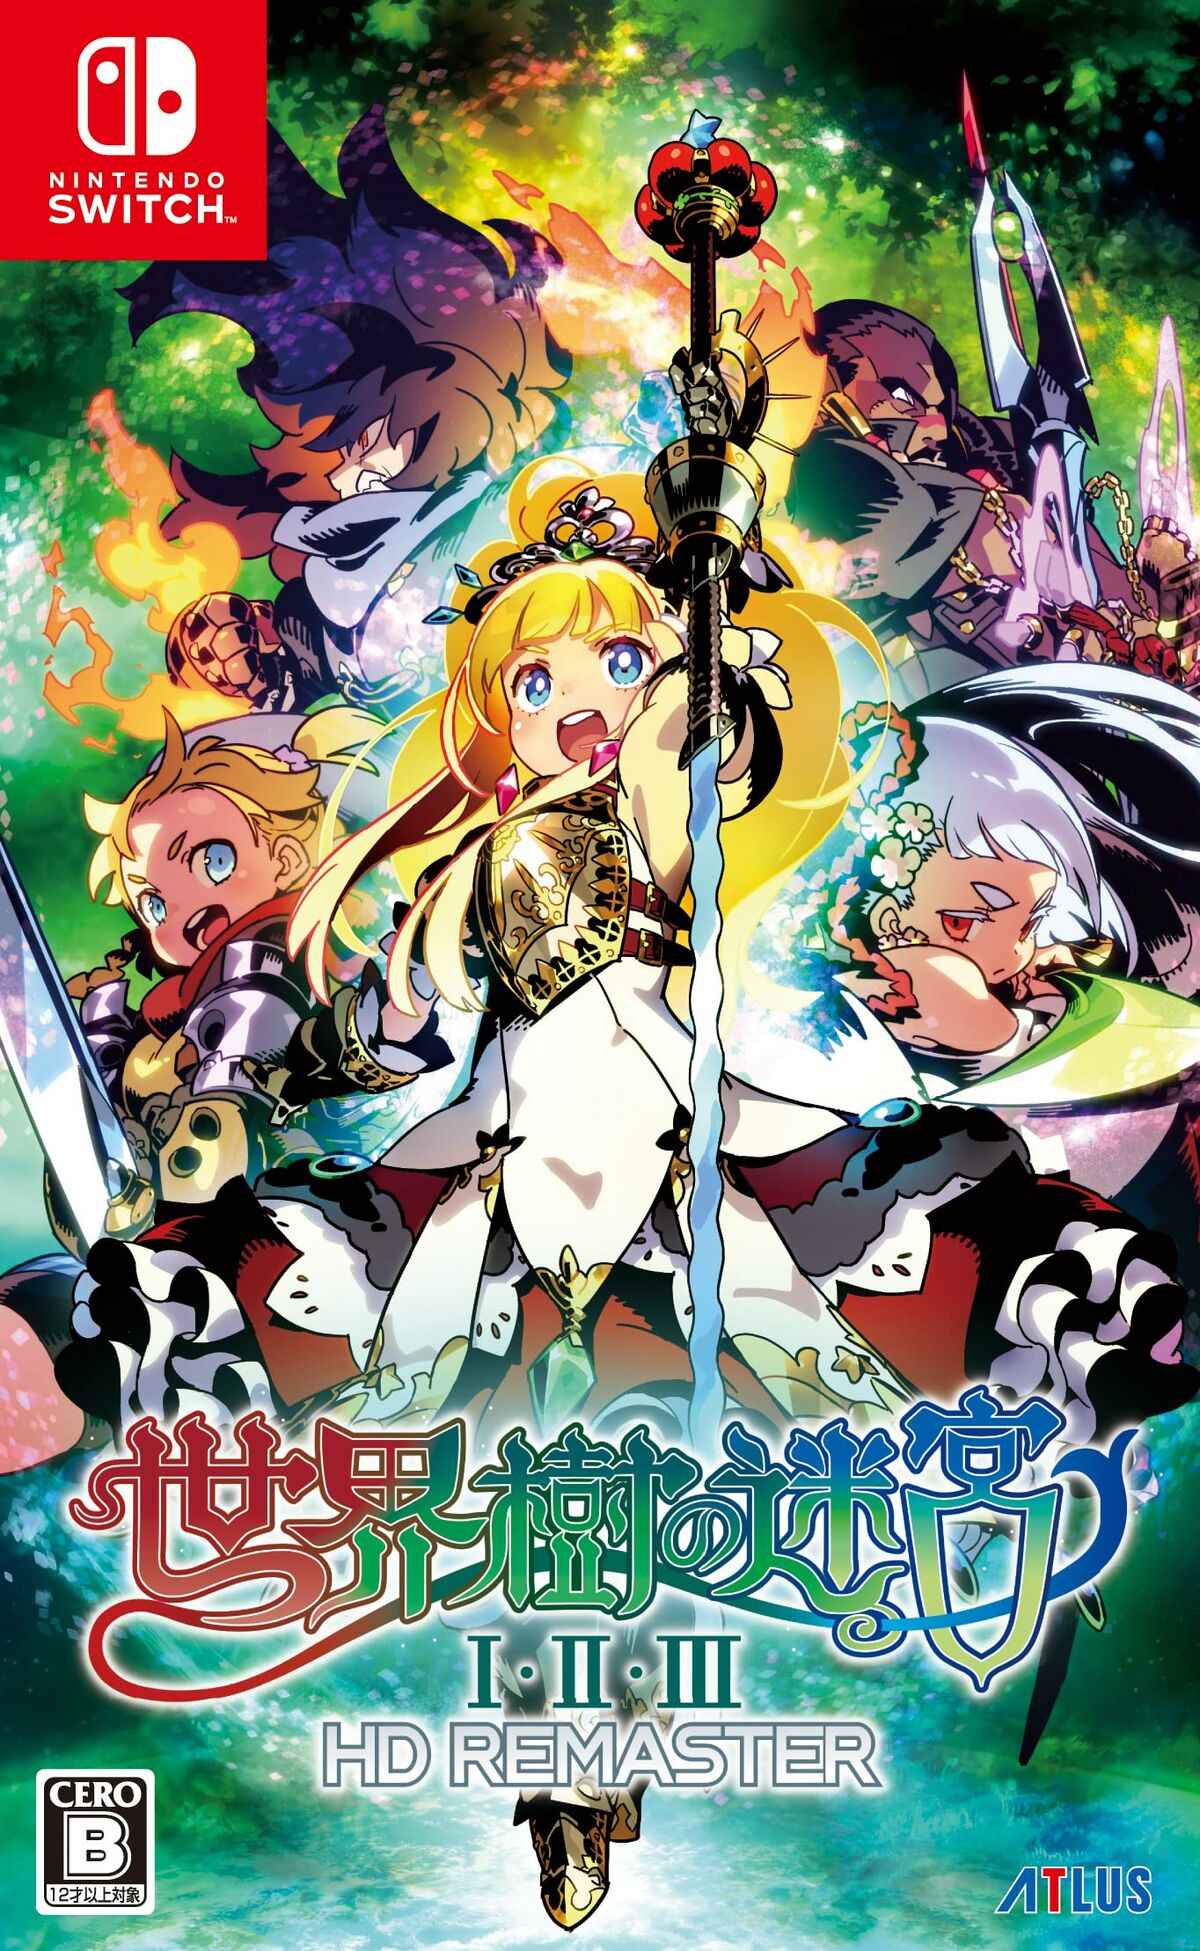 etrian-odyssey-origins-collection-strategywiki-the-video-game-walkthrough-and-strategy-guide-wiki